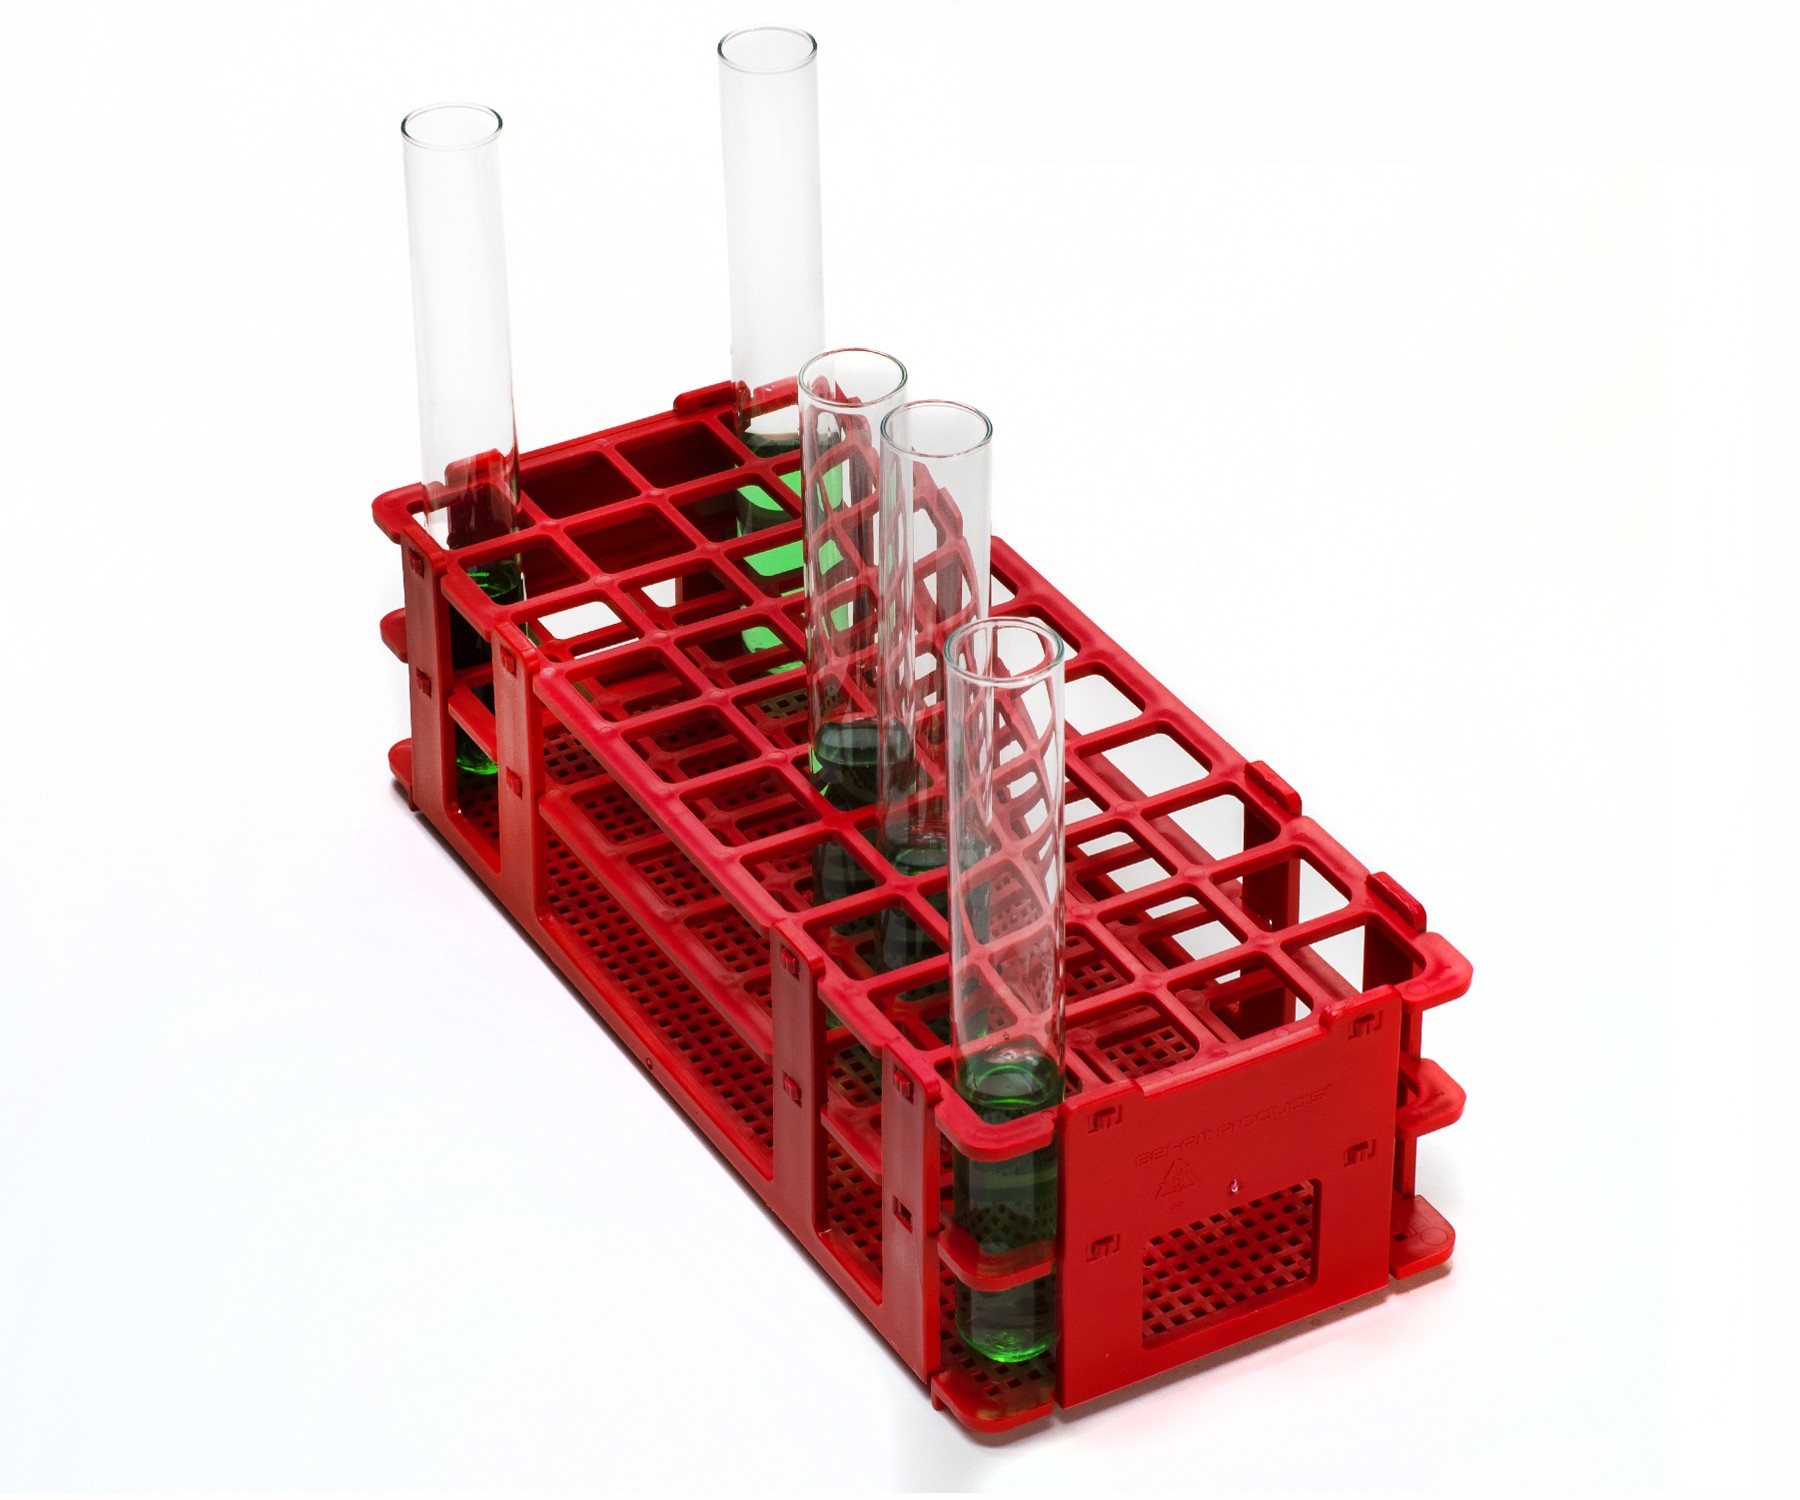 SP Bel-Art No-Wire Test Tube Rack; For 16-20mm Tubes, 40 Places, Red